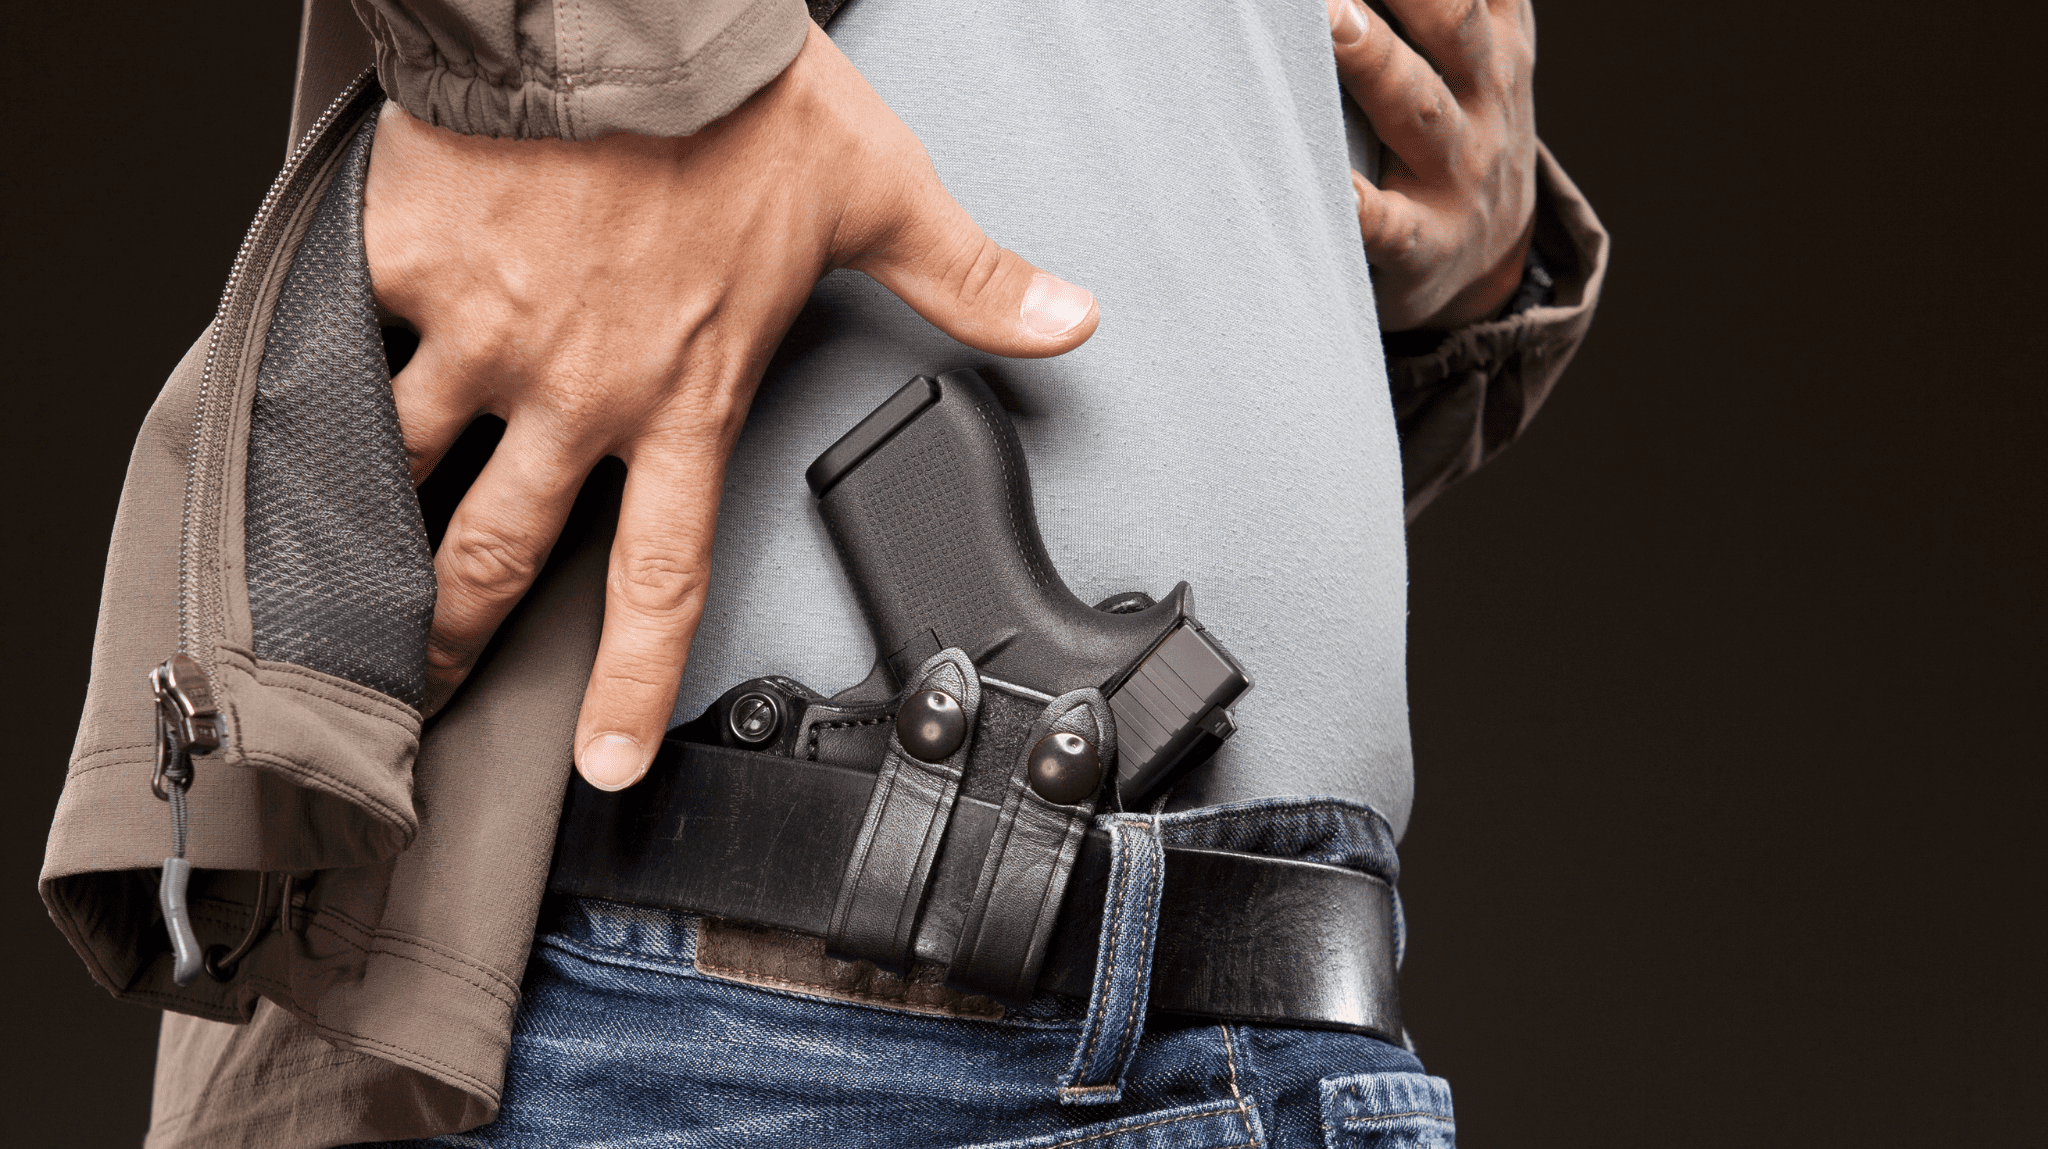 Permitless concealed carry bill fails in committee